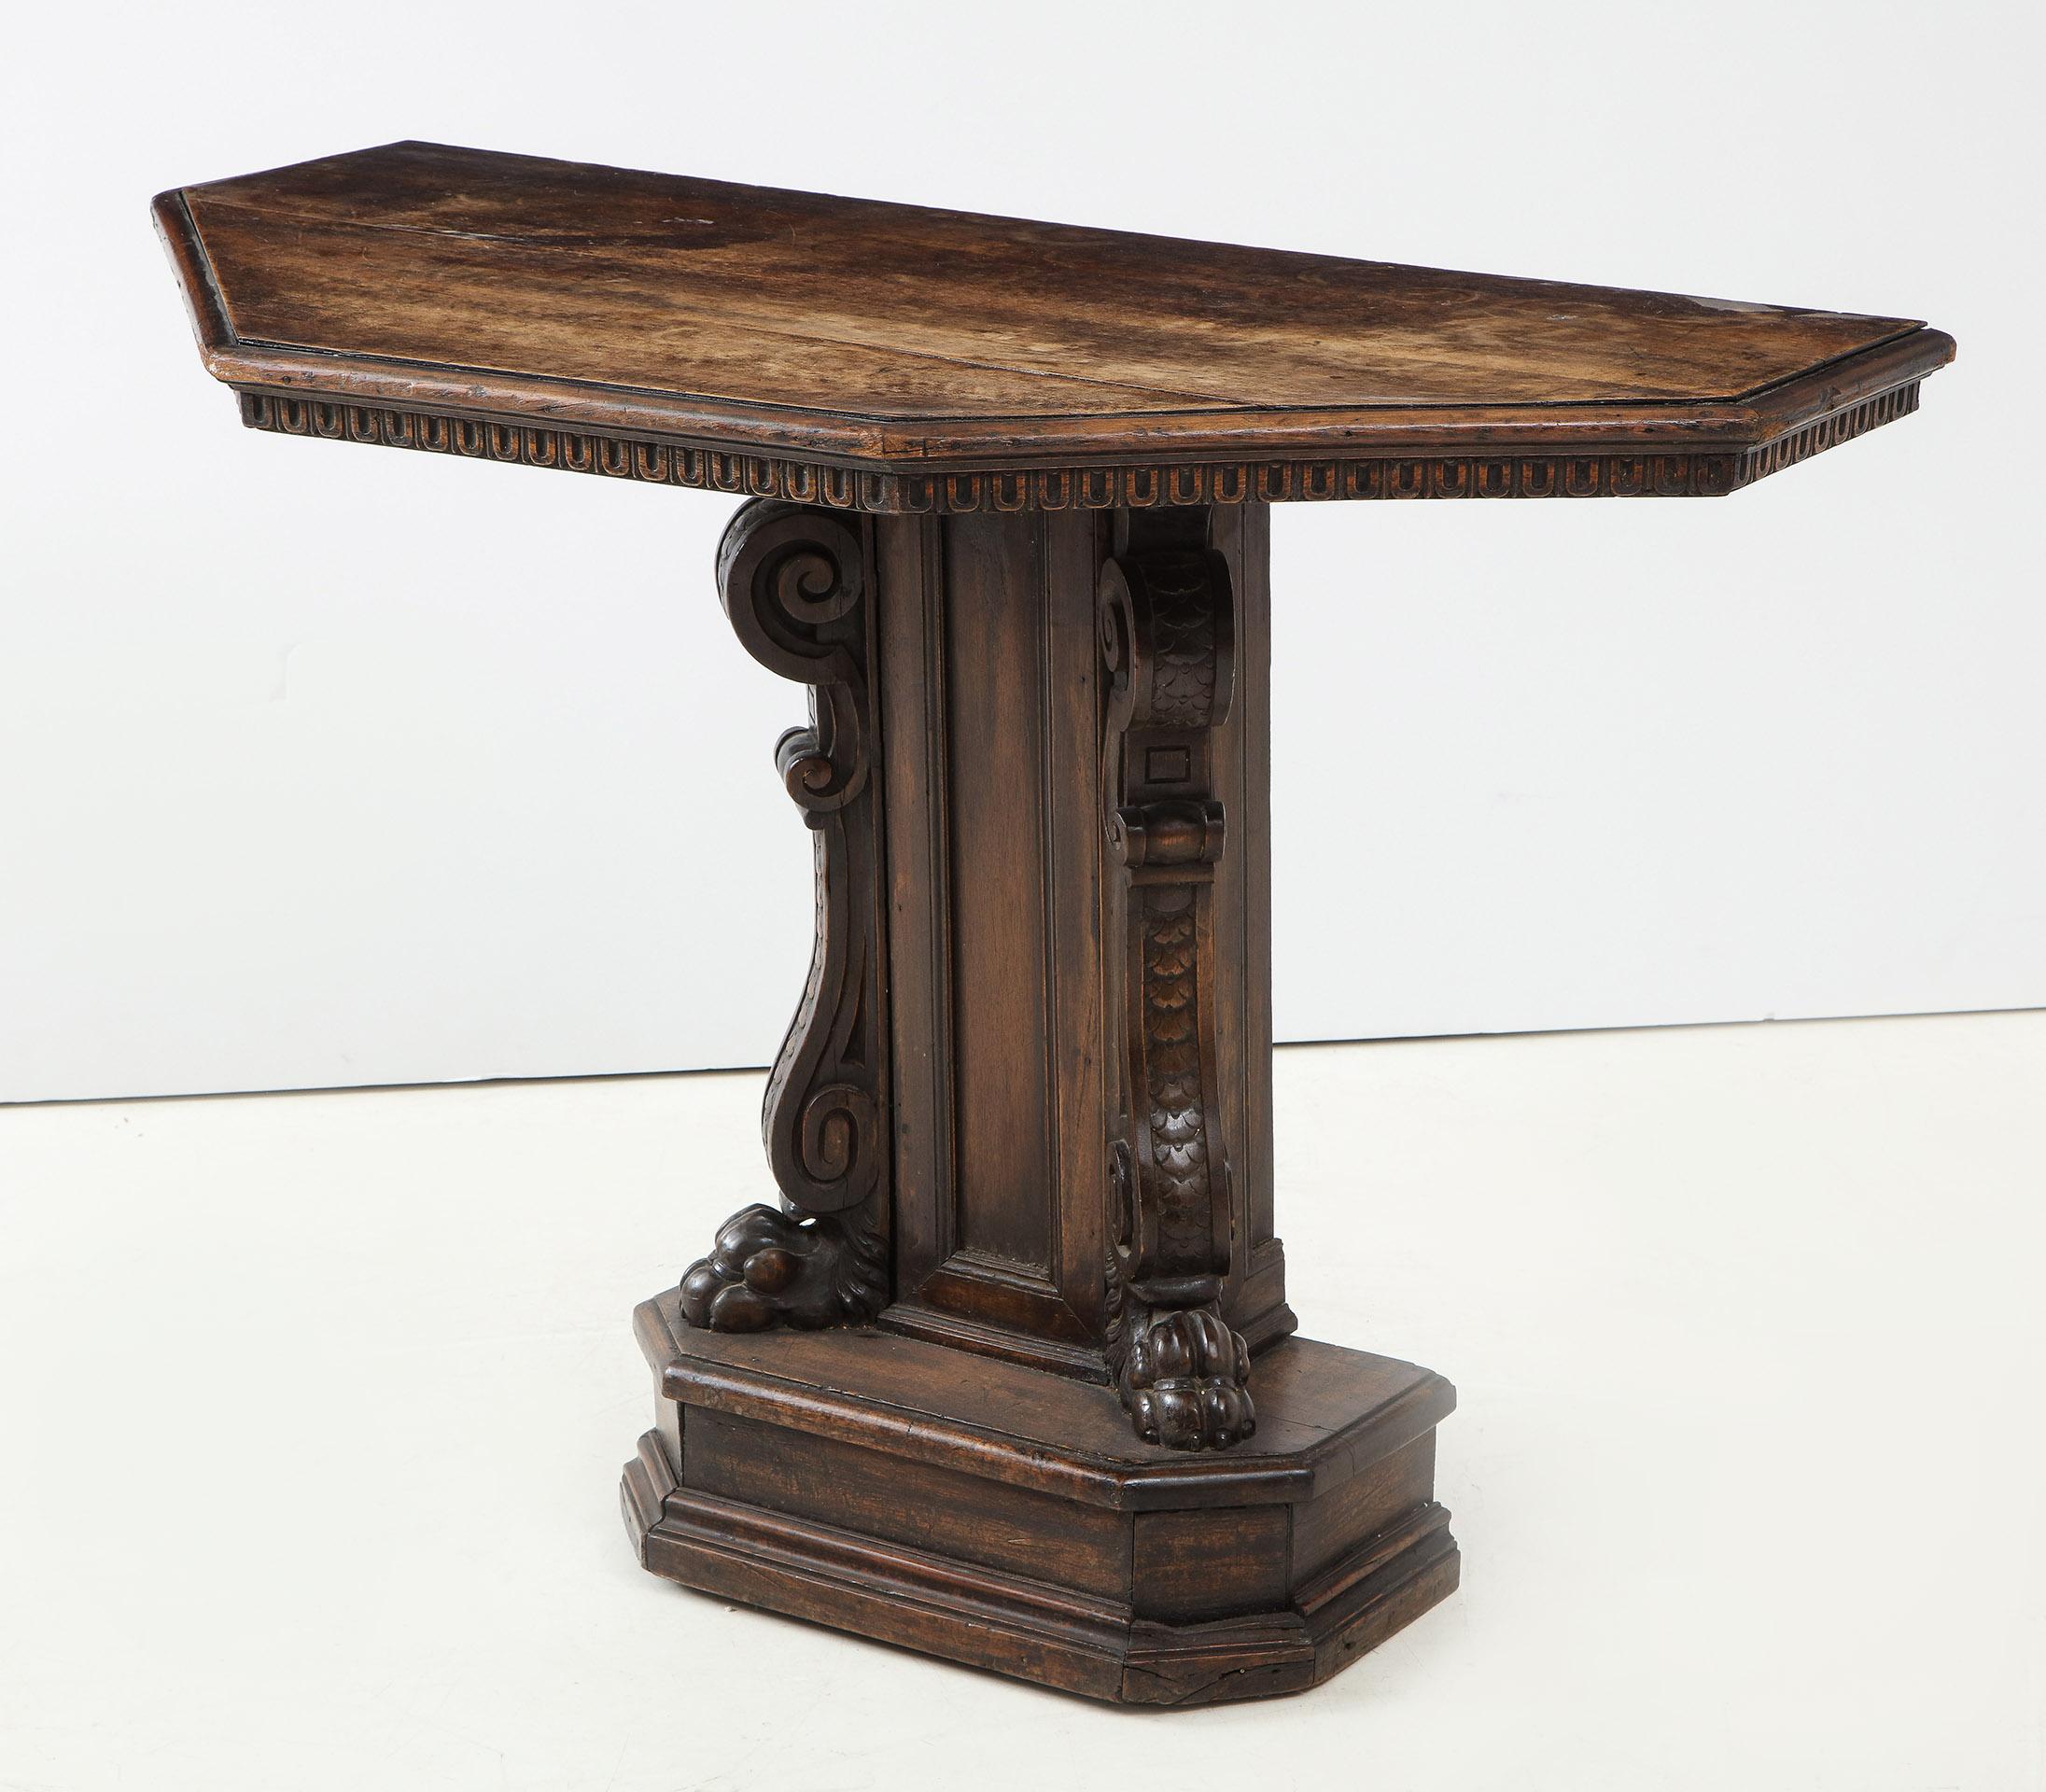 Renaissance Revival walnut console table

The canted corner top with a dental molded frieze over a central column with a well carved scroll ending in paw feet, the whole on a stepped plinth.